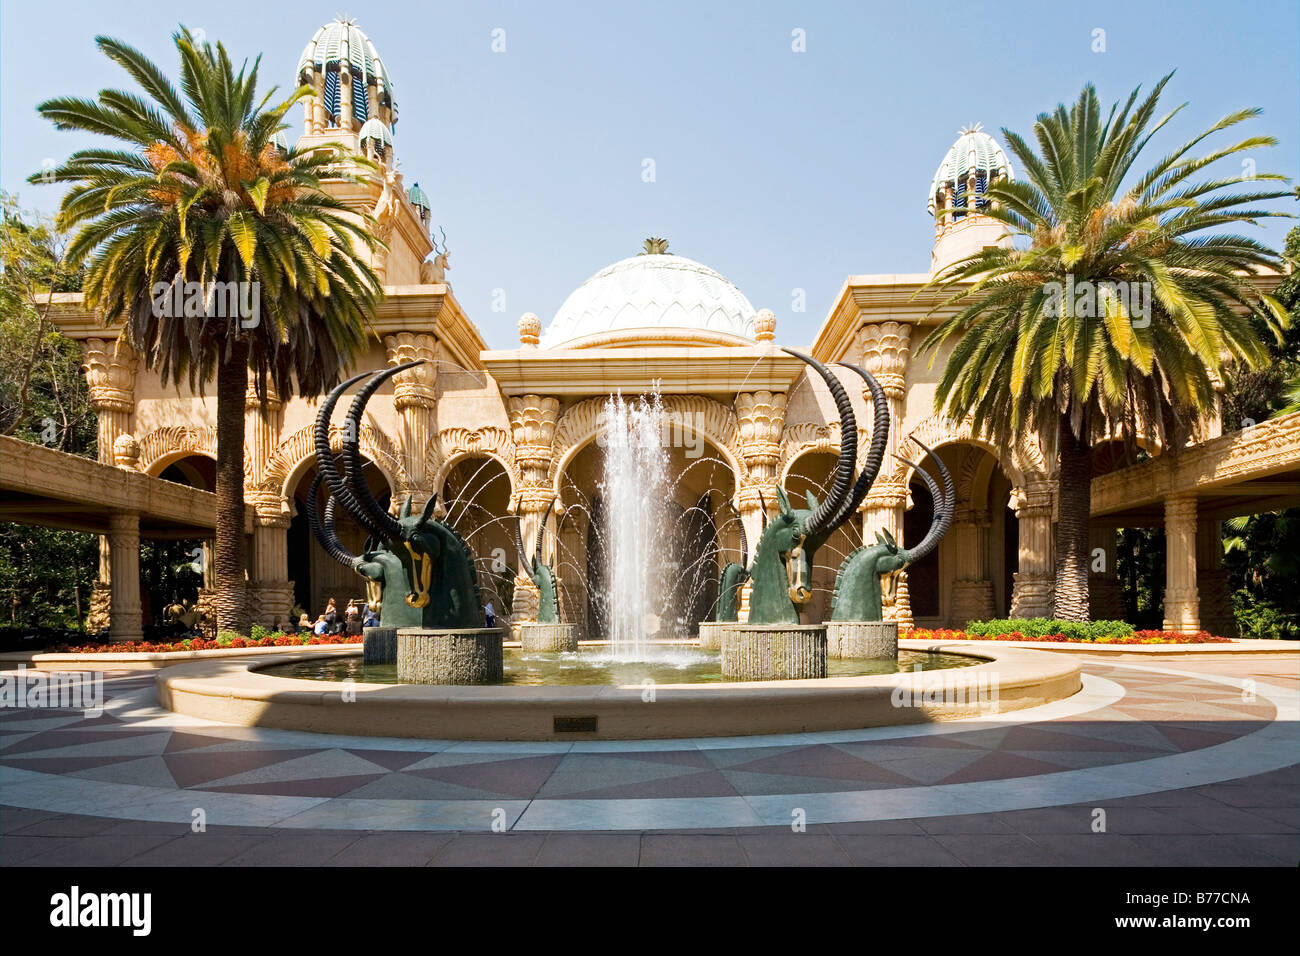 Sable Fountain Entrance, Lost City, Sun City, South Africa, Africa Stock Photo